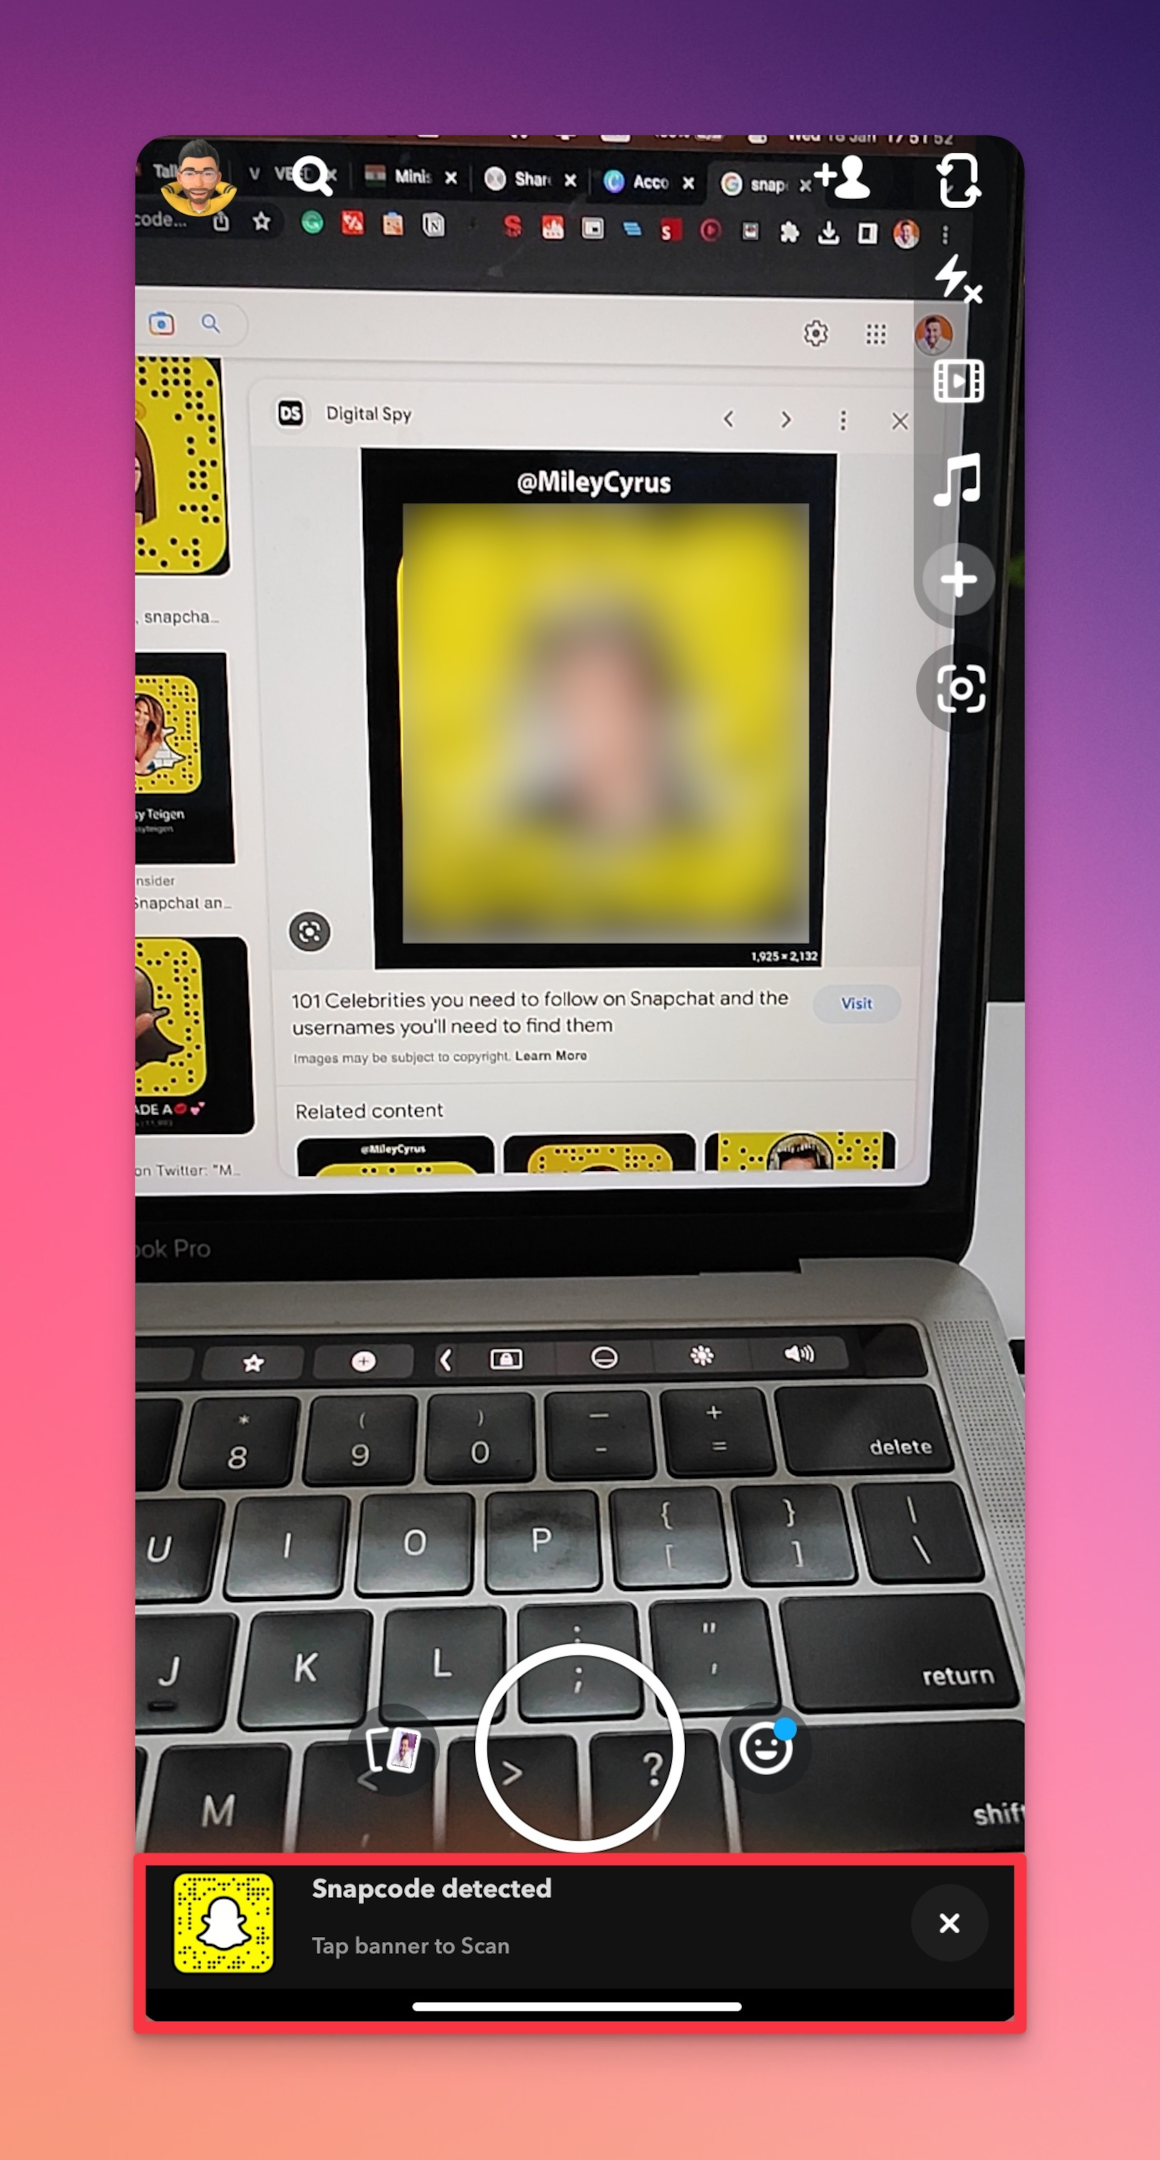 Remote.tools showing the snap code screen when a scanned code has deteced a Snapchat profile that can be added as a friend